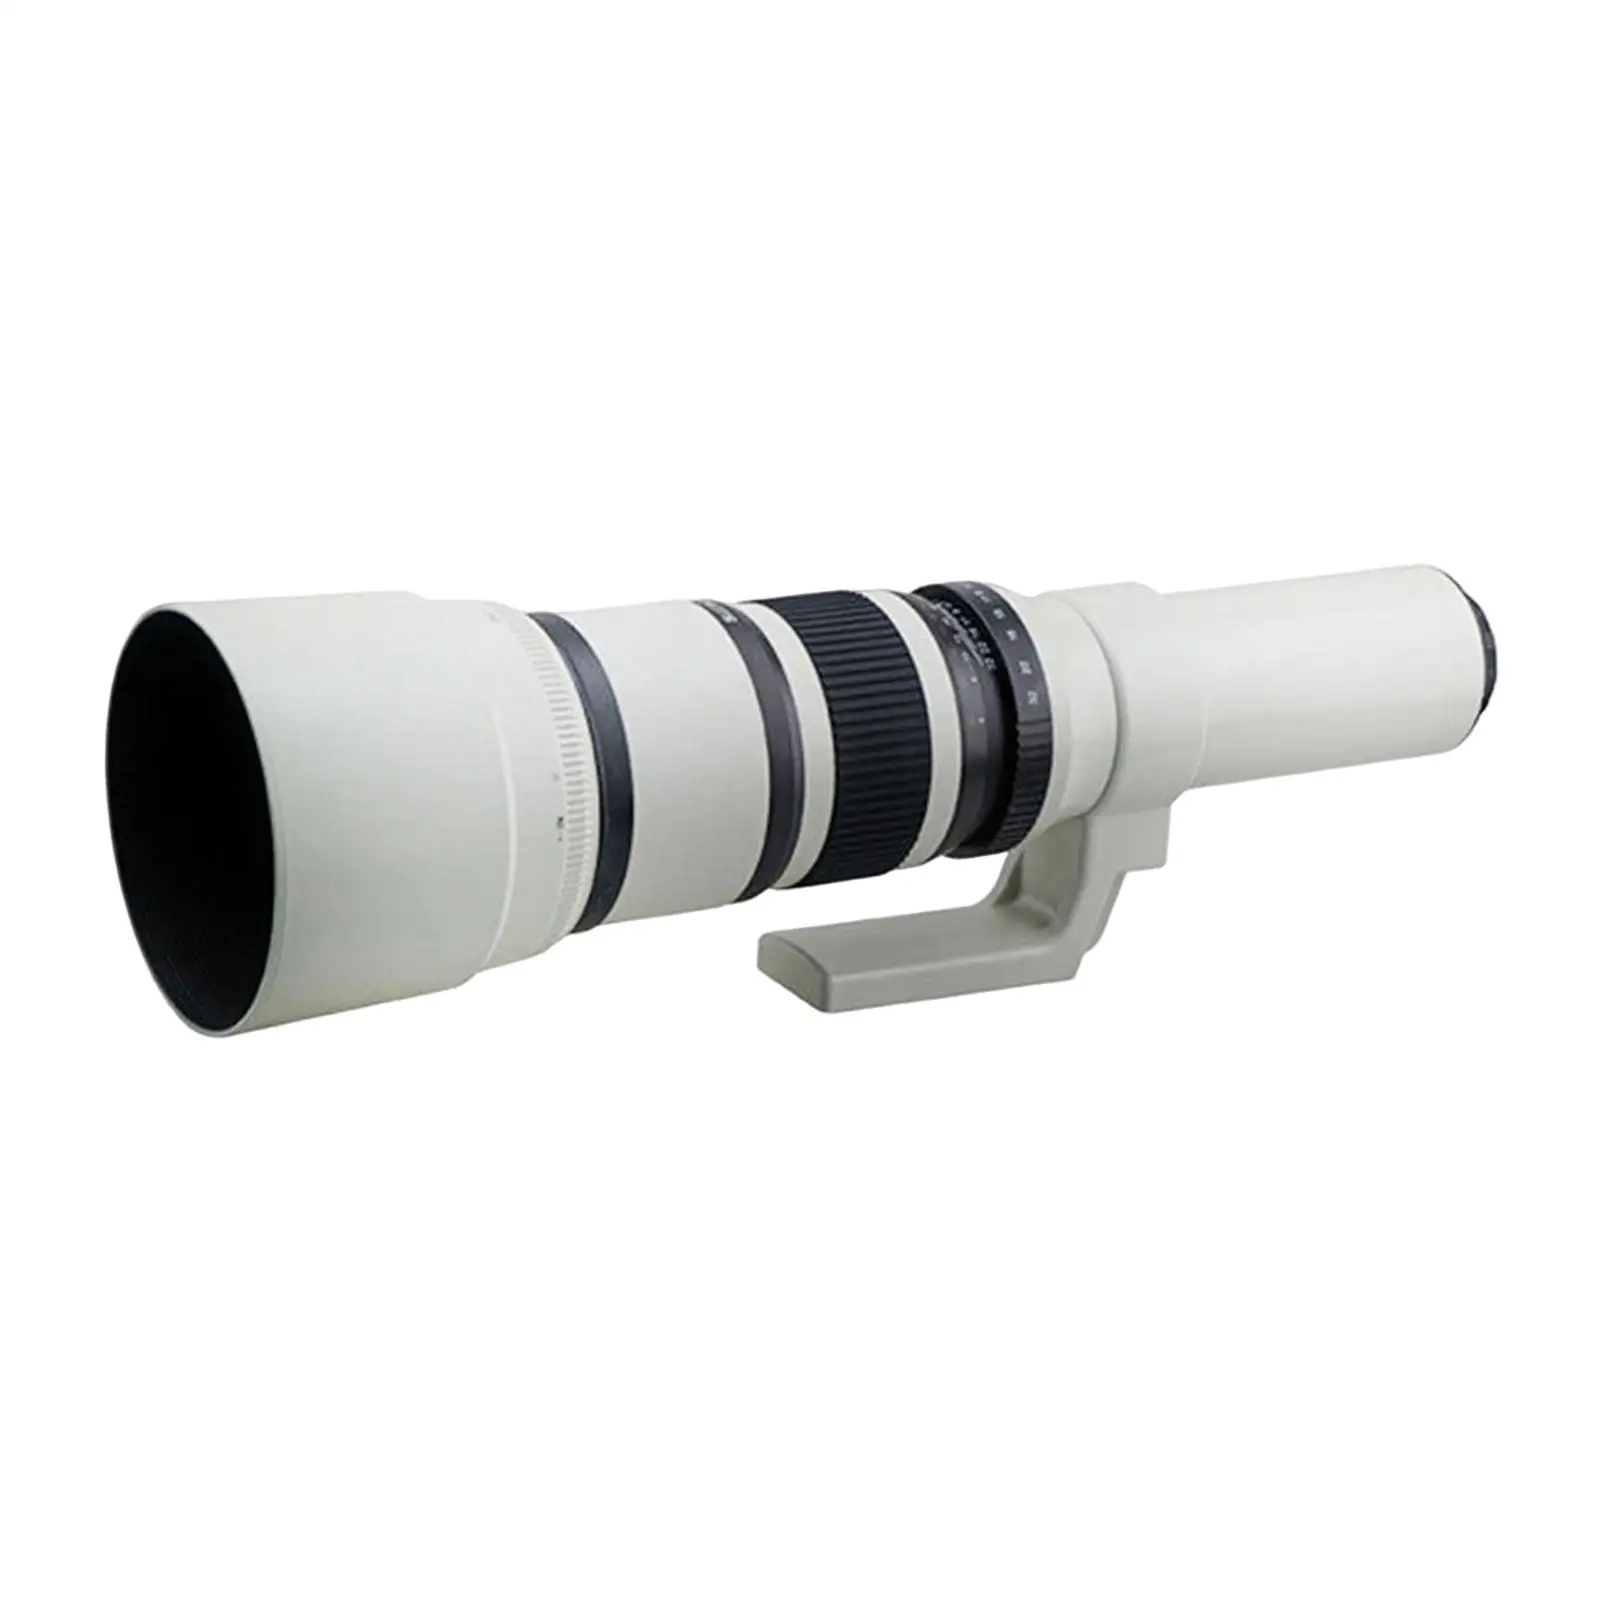 500mm F6.3 to F32 Super Telephoto Lens DSLR Cameras 86mm Front Filter Diameter Portable with Carrying Bag Fixed Focus Lens